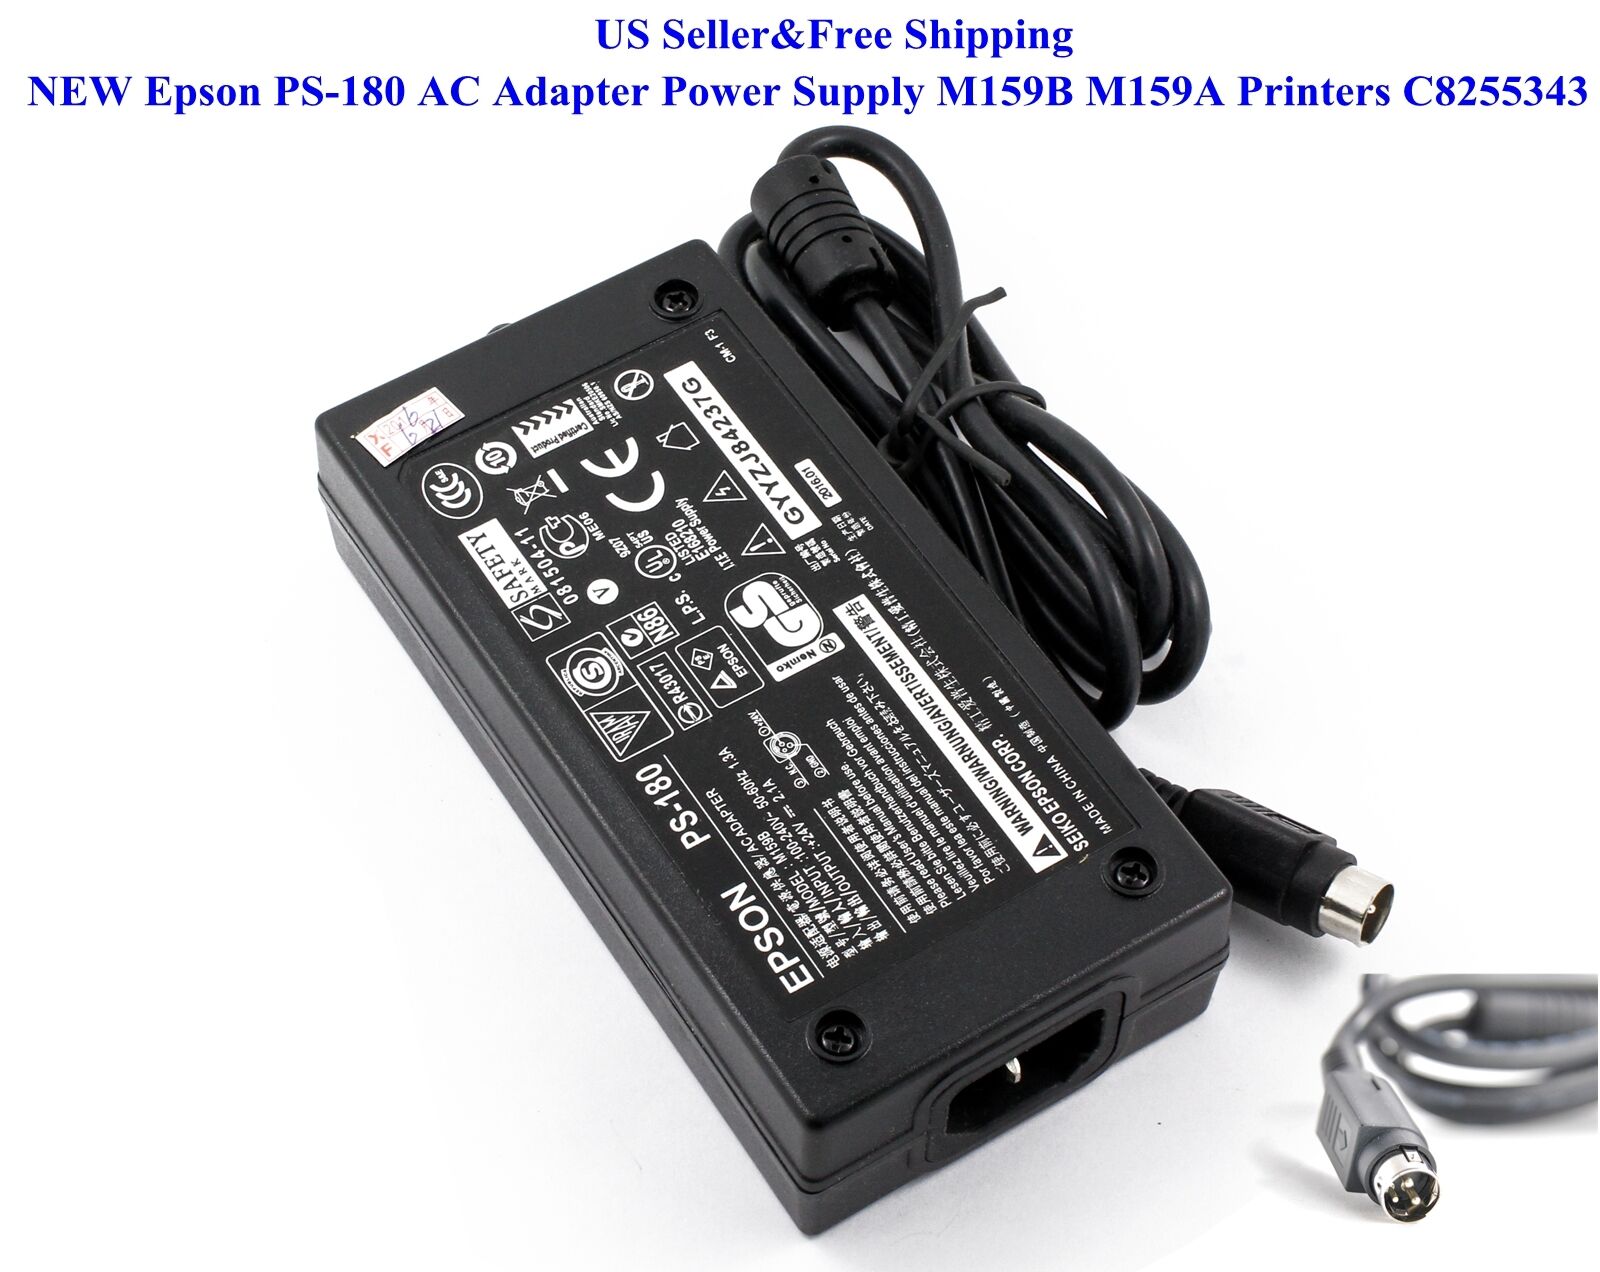 New Epson Ps-180 Ac Adapter Power Supply M159b M159a Printers C8255343 Us